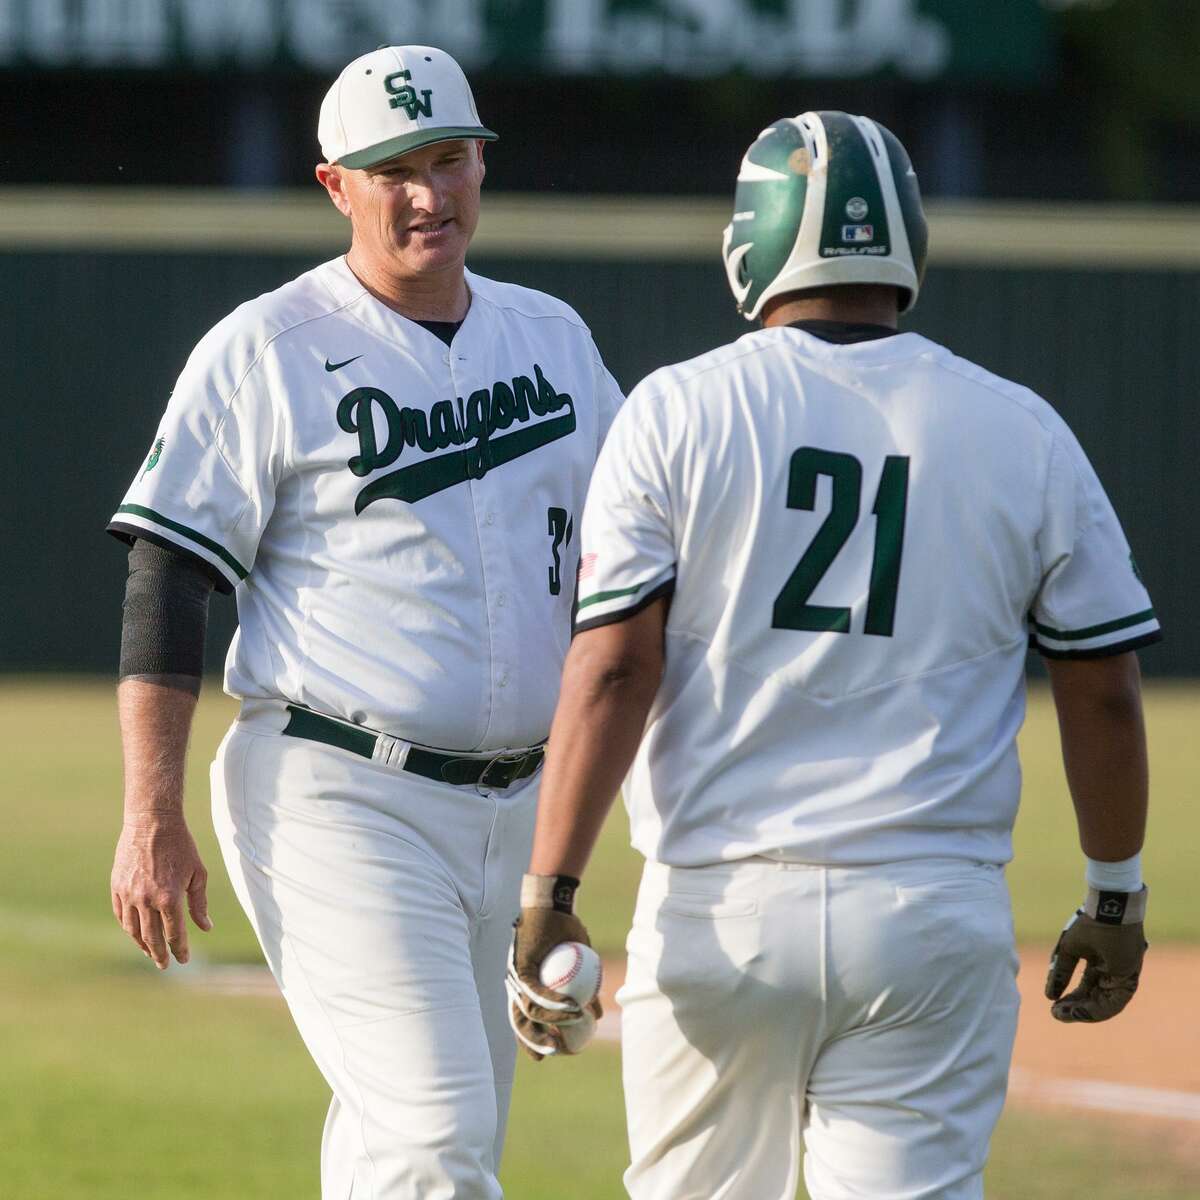 Southwest coach Bobby Behnsch (left) talks to Luis Padilla during a District 29-6A baseball game against South San on April 25, 2017.